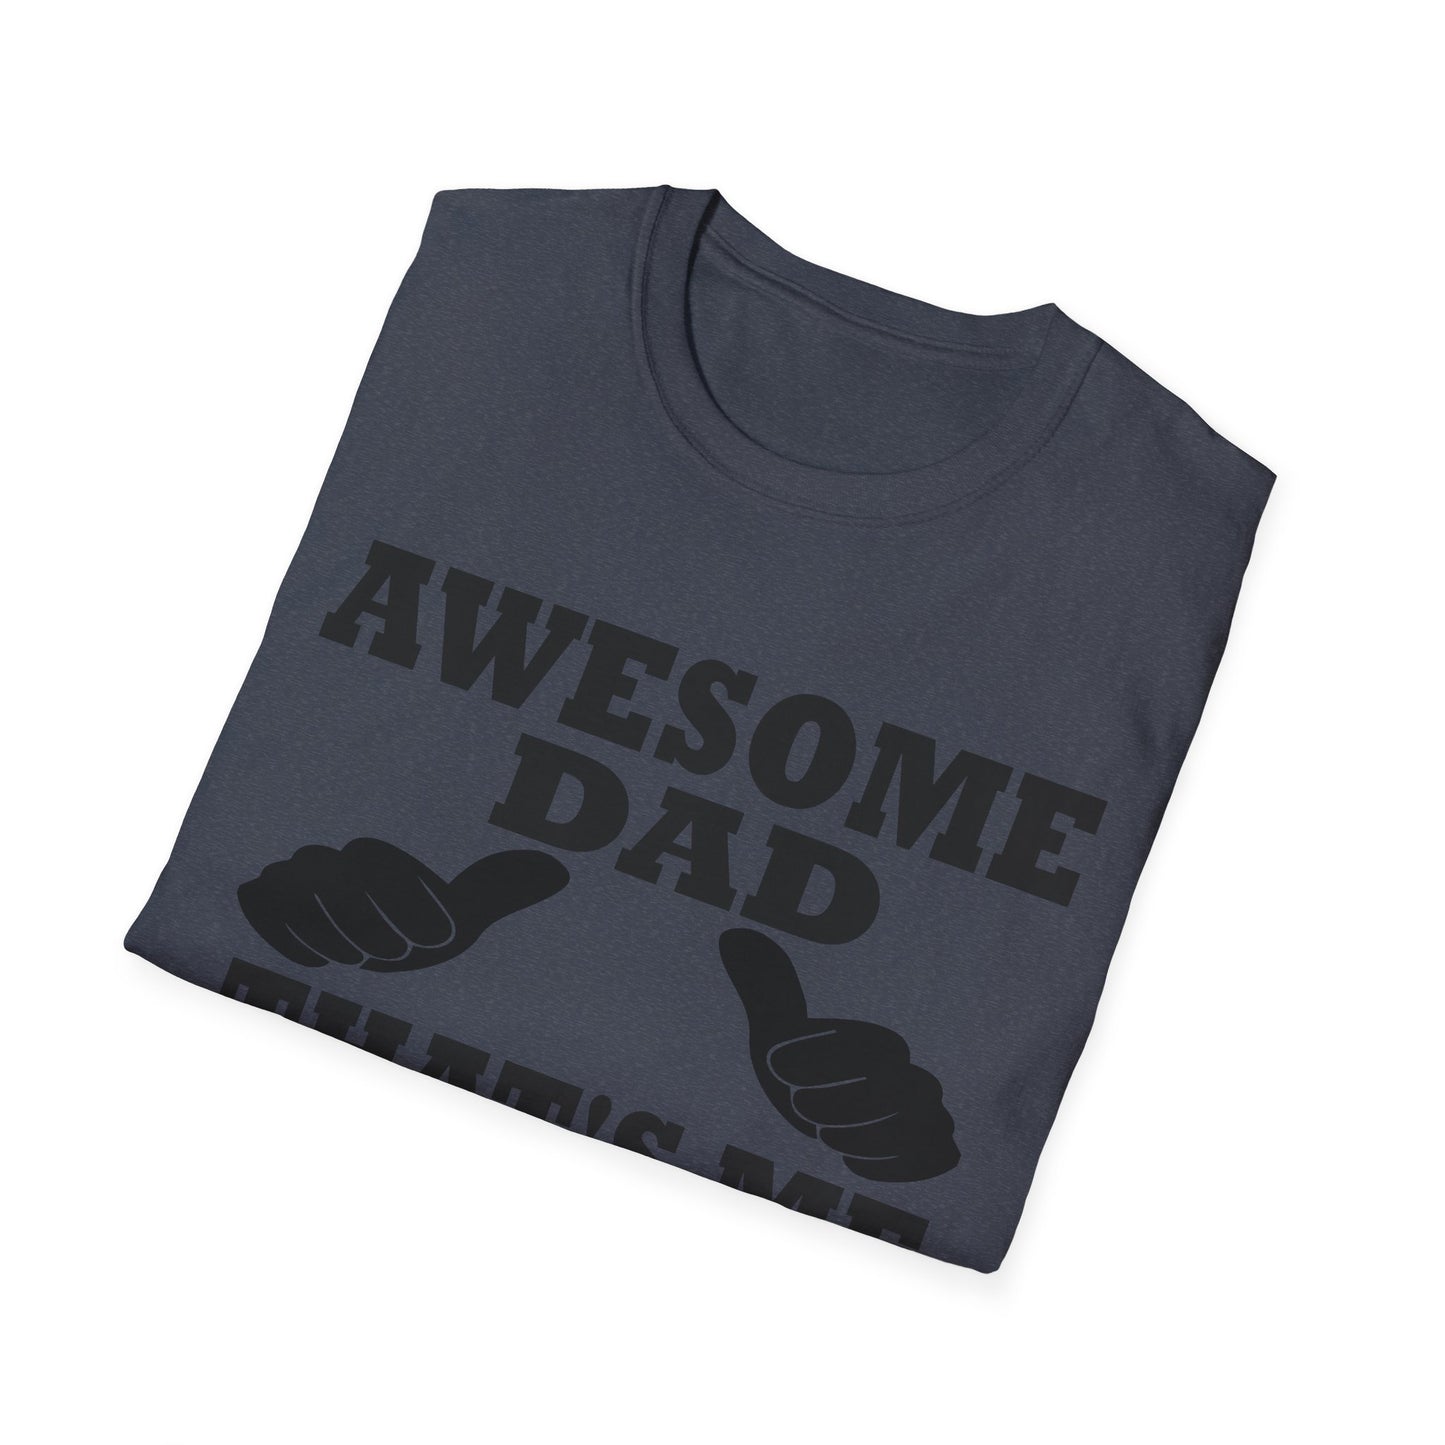 Awesome Dad Soft style T-Shirt